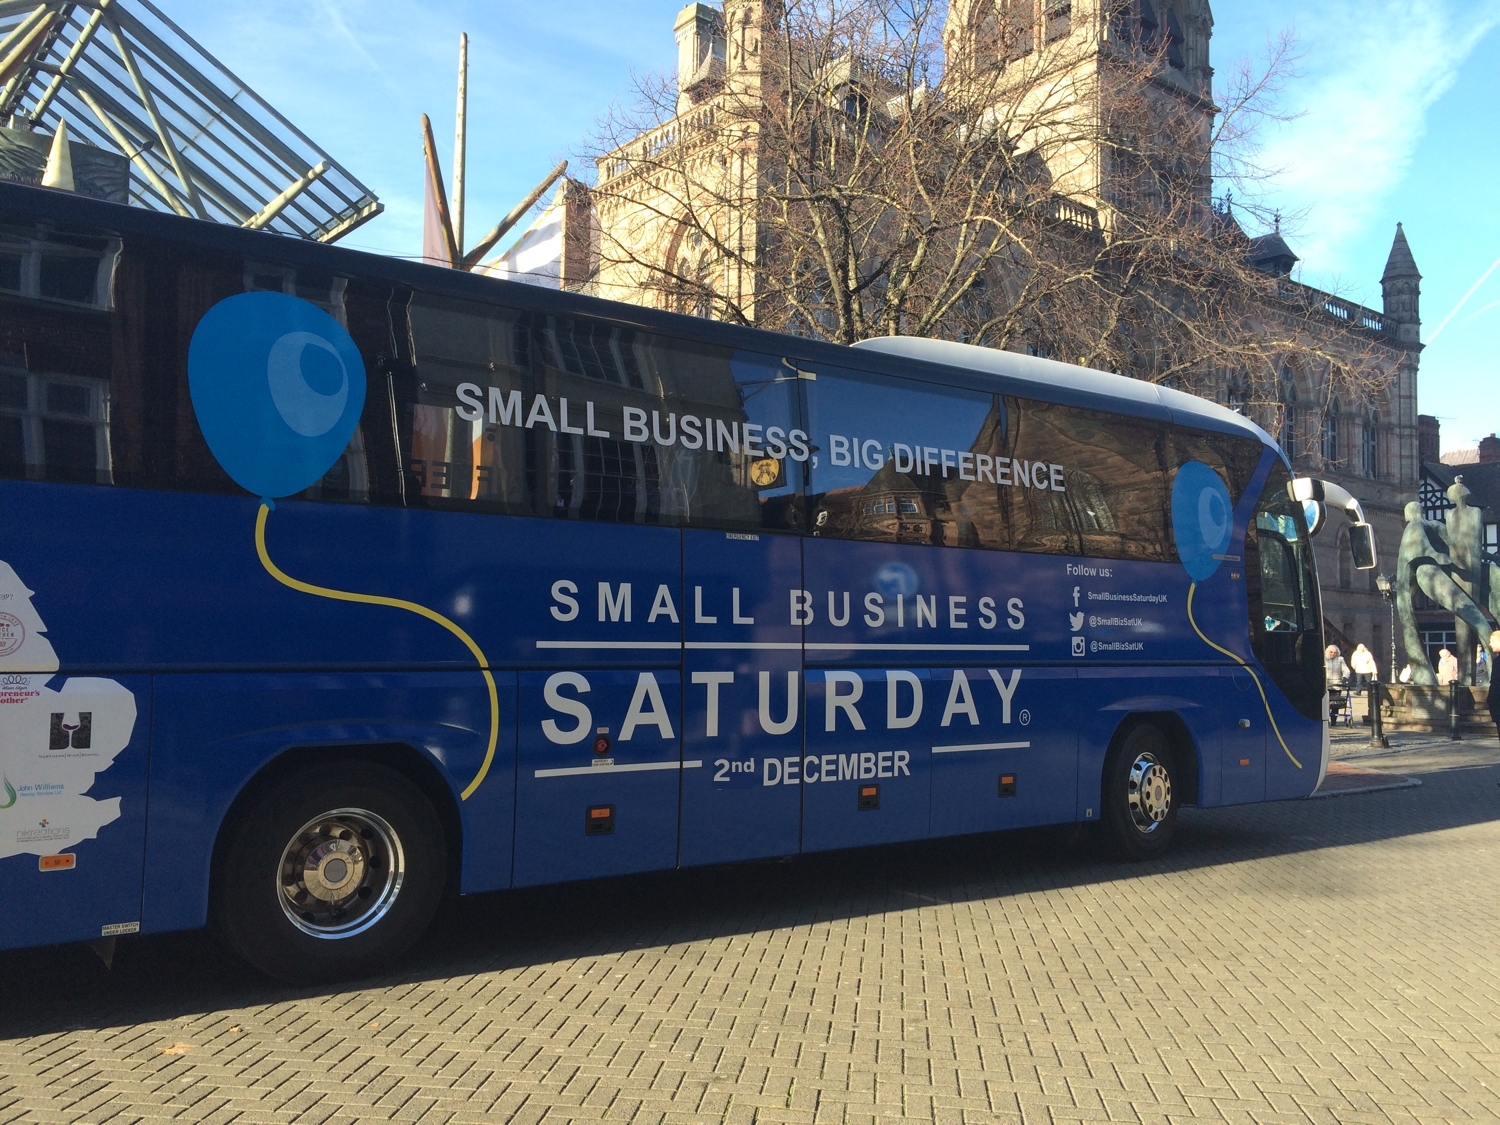 Small Business Saturday Bus is coming to Stevenage town!